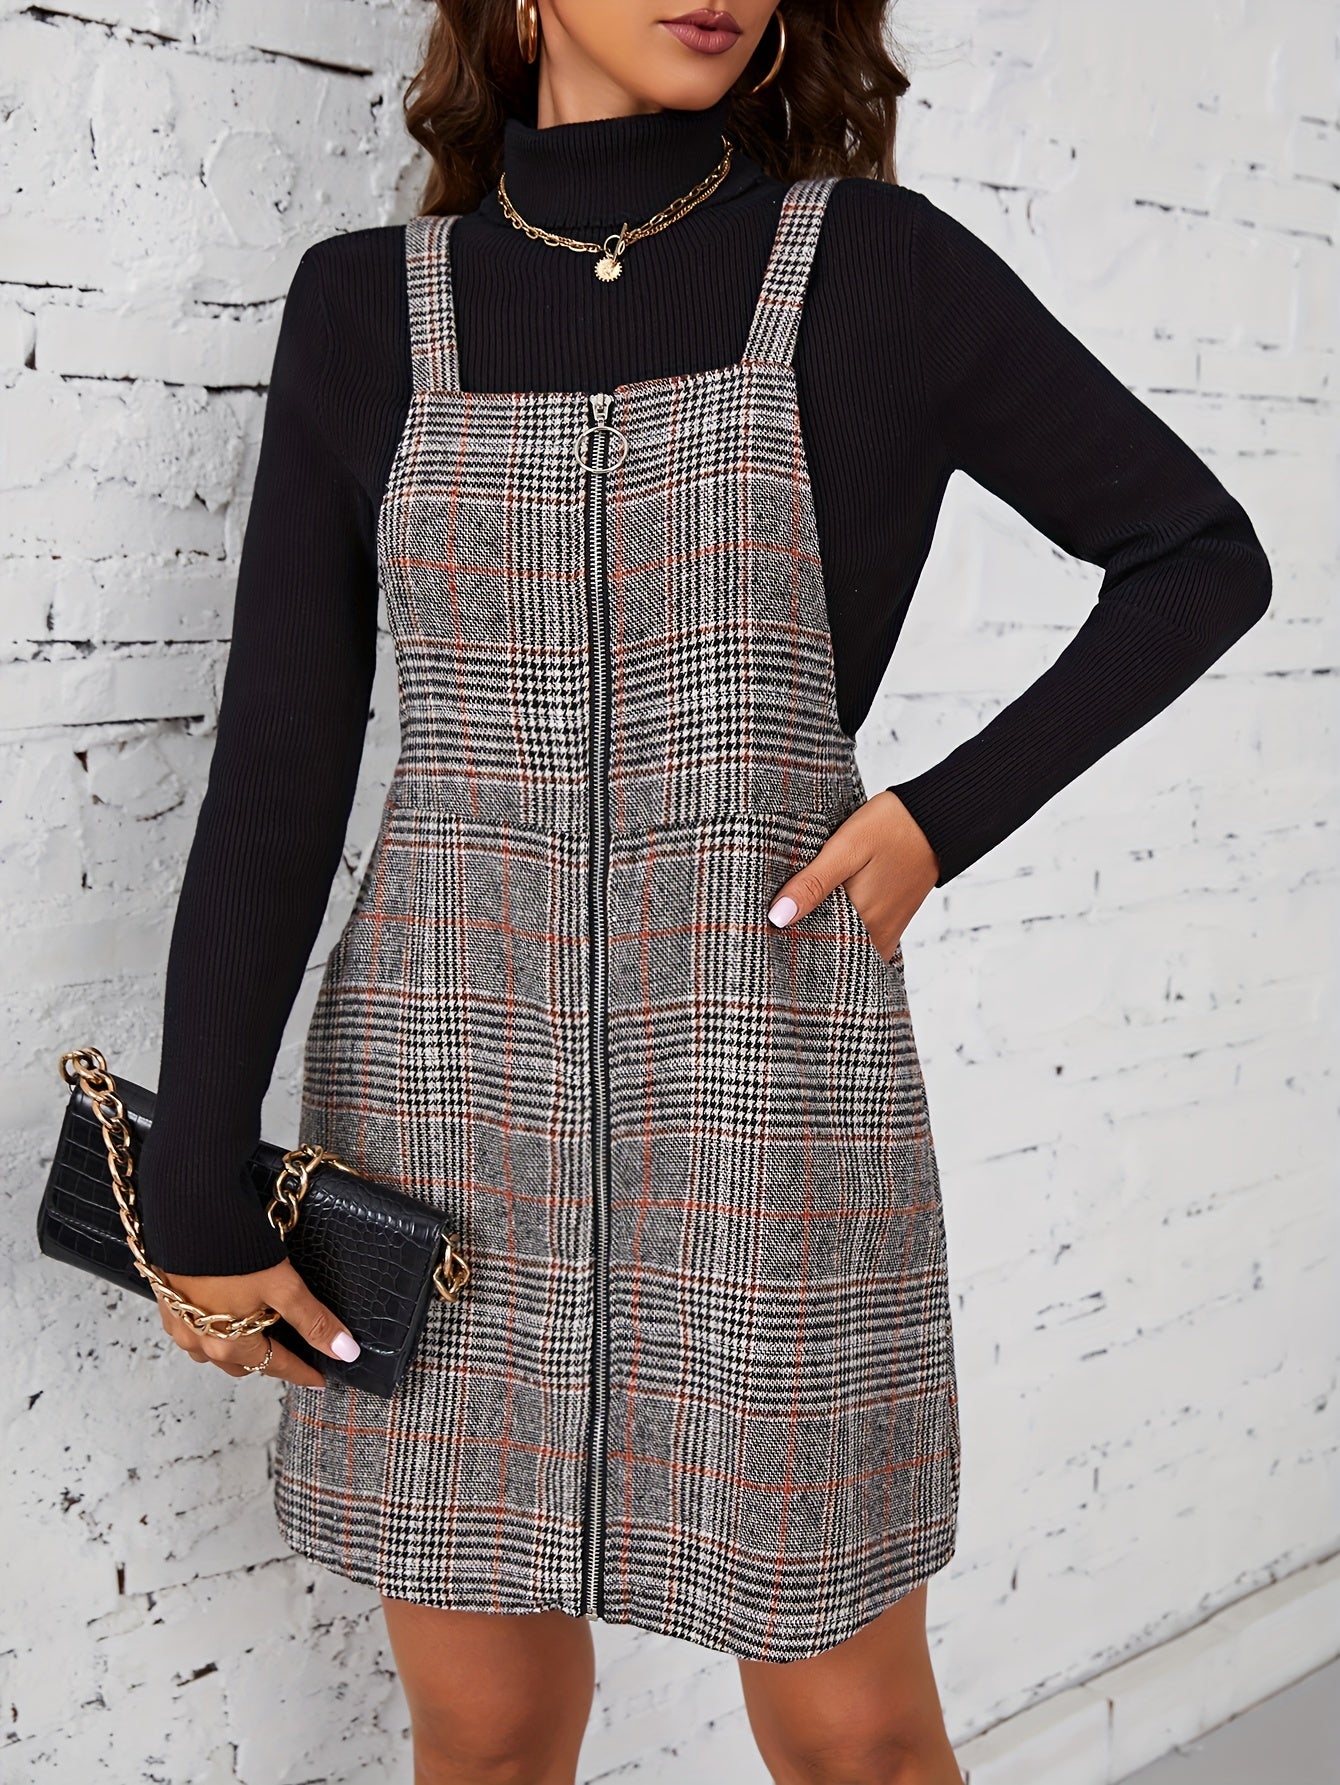 Antmvs Plaid Print Overall Dress, Casual Zipper Bodycon Dress With Pockets, Women's Clothing